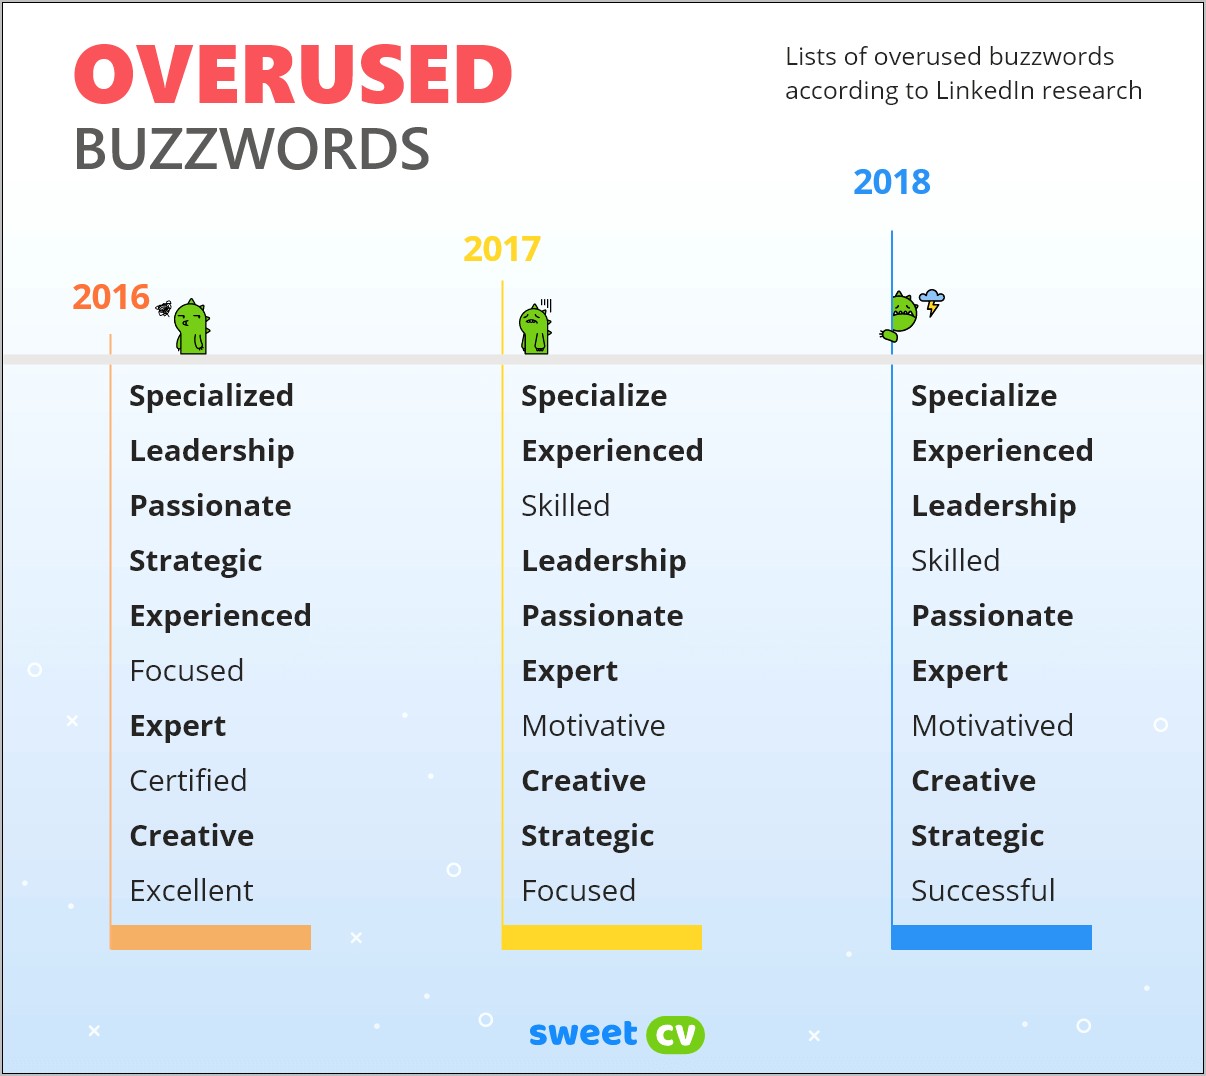 Buzz Words Not To Use In Resume